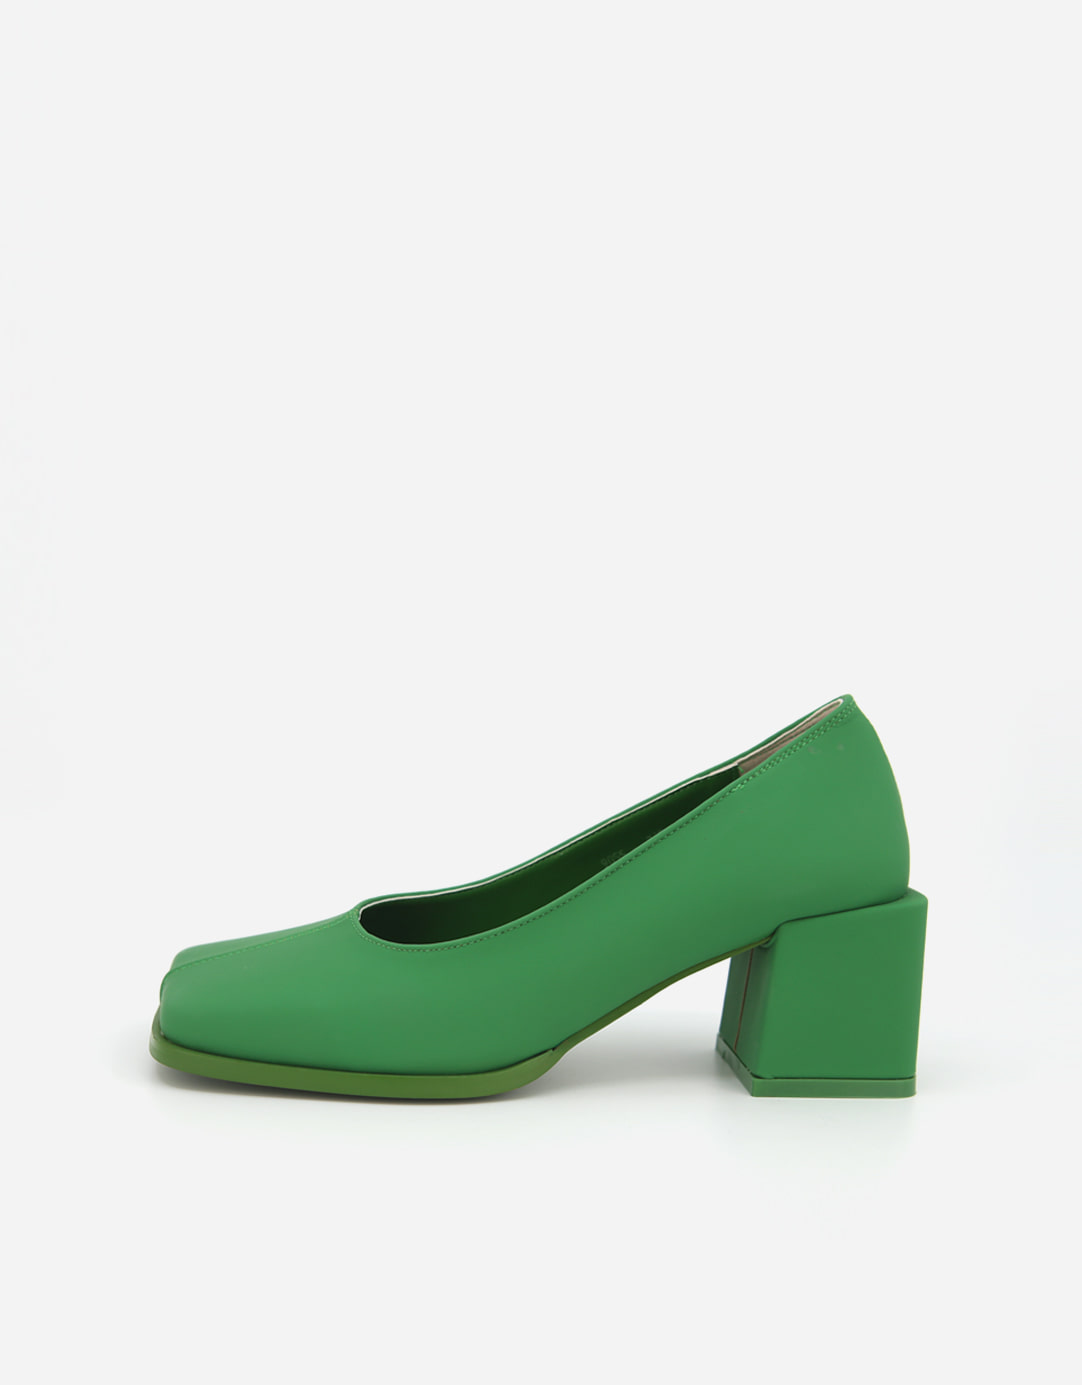 SQUARE COLOR MIDDLE HEEL